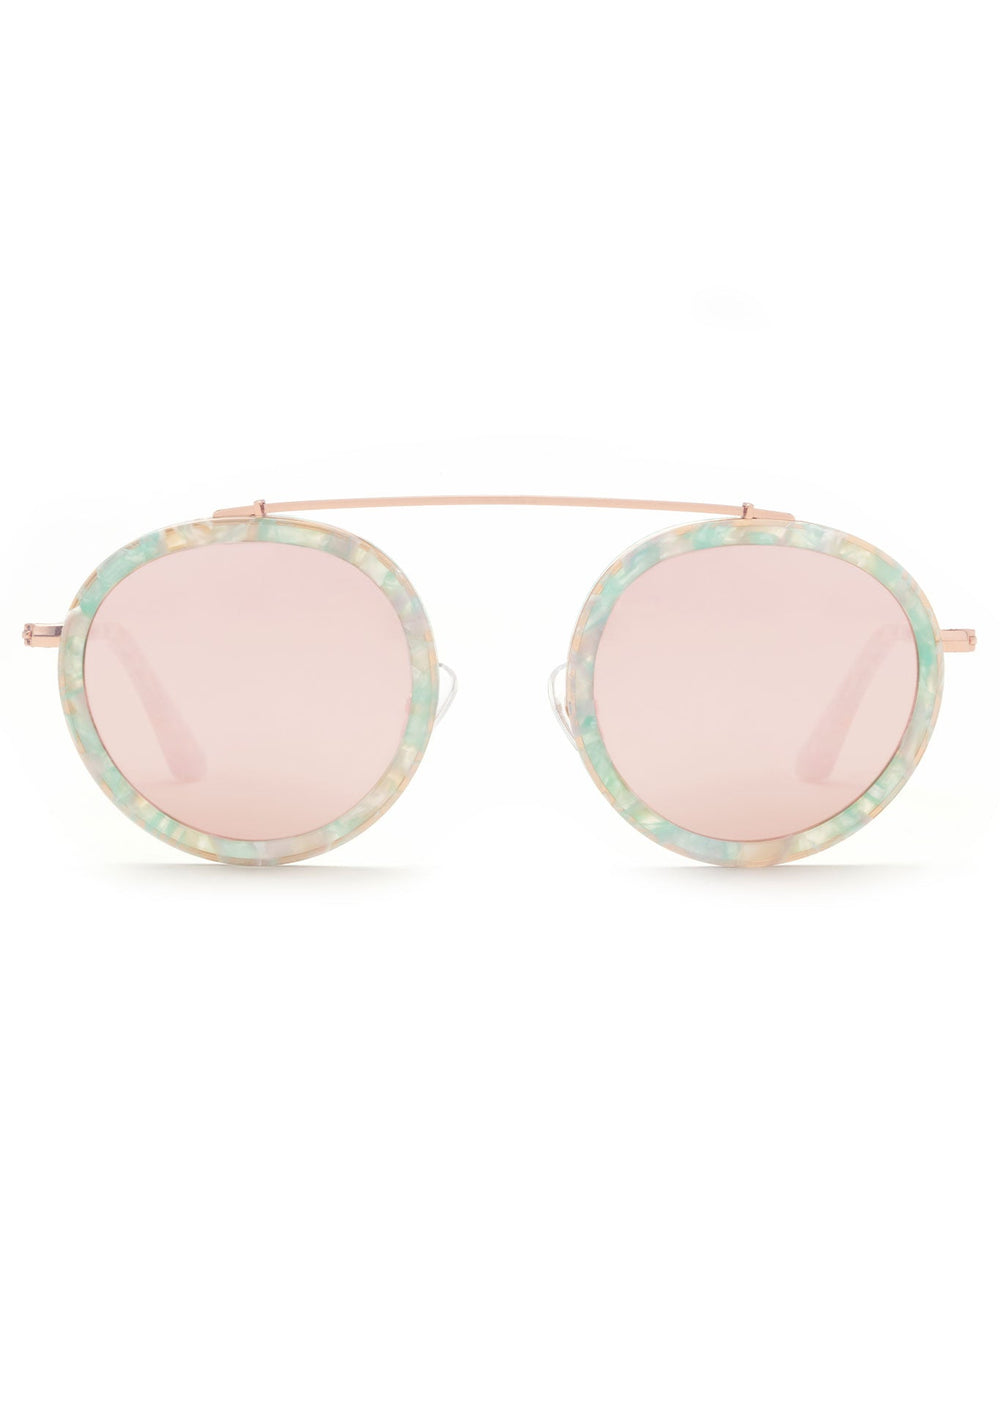 CONTI | Seaglass Rose Gold Mirrored handcrafted, luxury green and blue acetate KREWE sunglasses